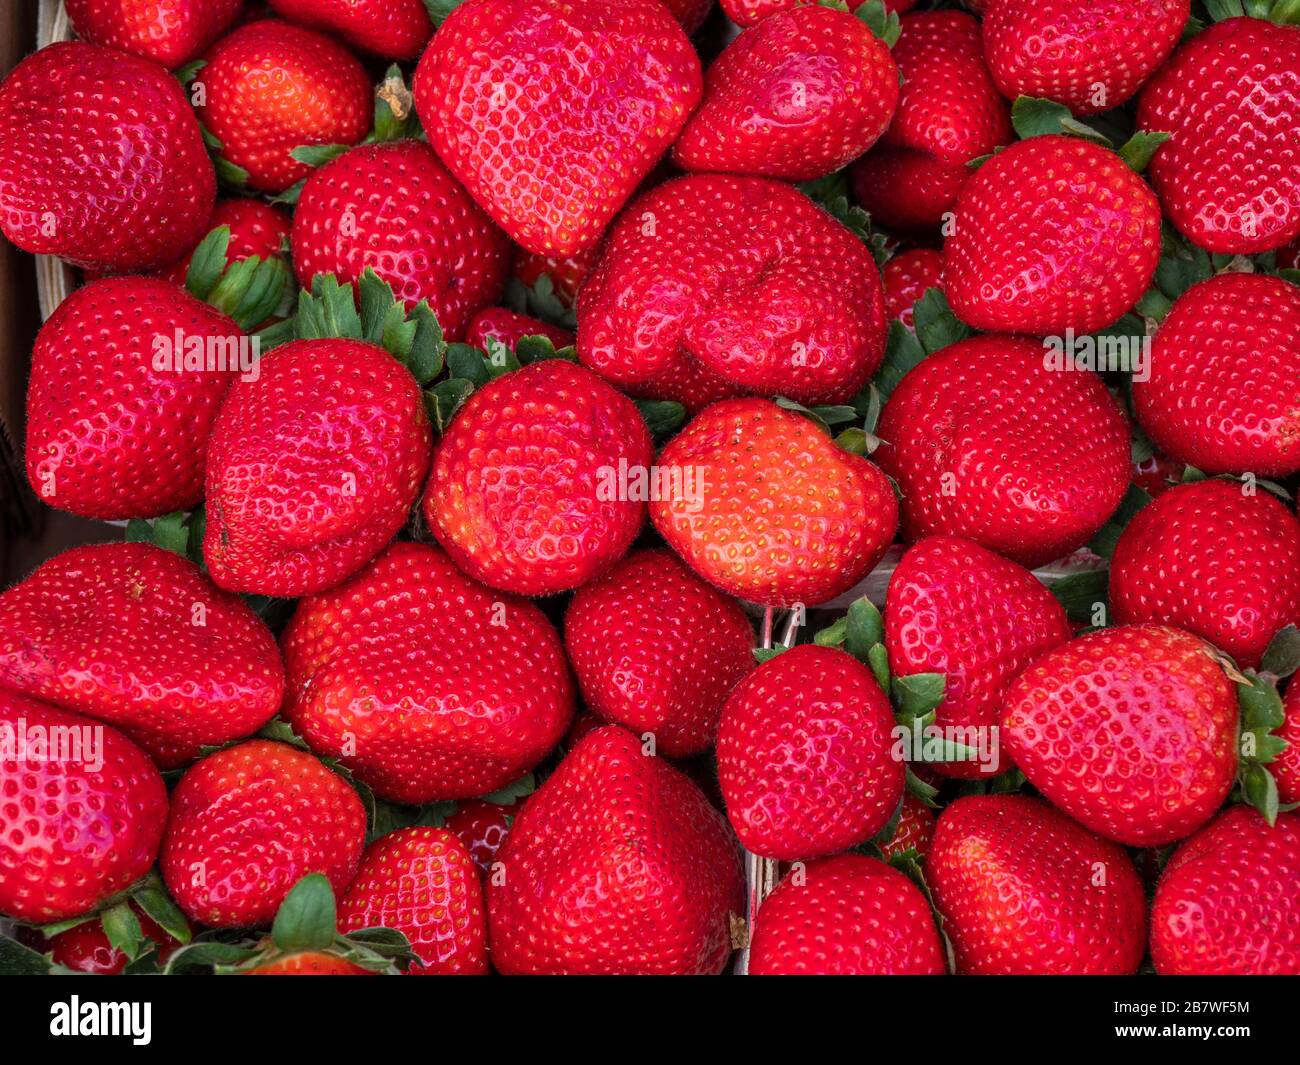 Full frame image of bright red strawberries Stock Photo